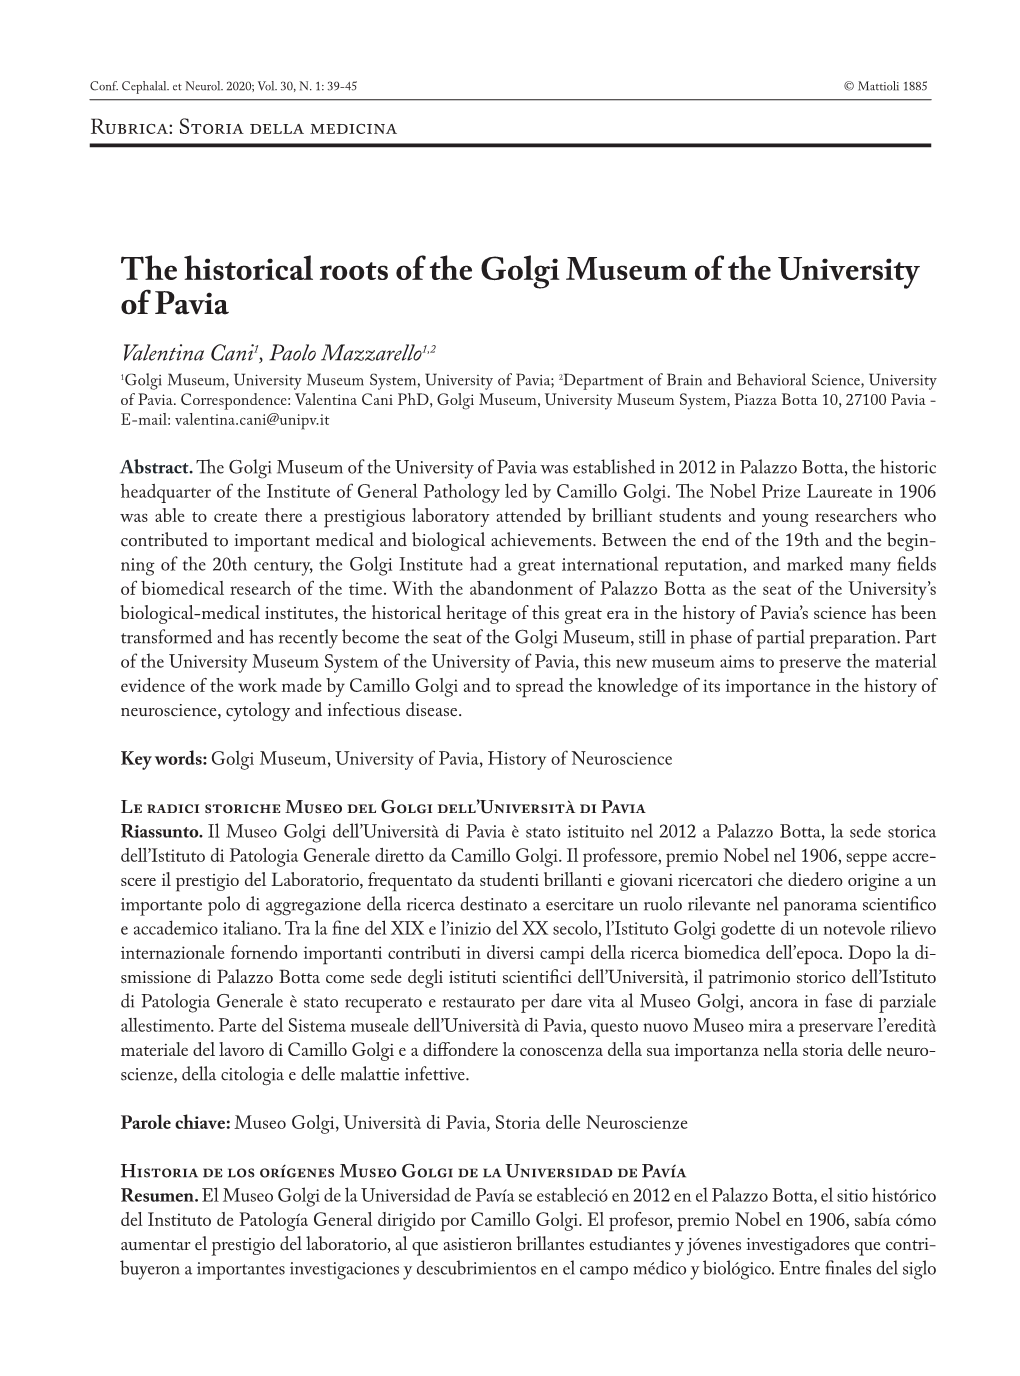 The Historical Roots of the Golgi Museum of the University of Pavia